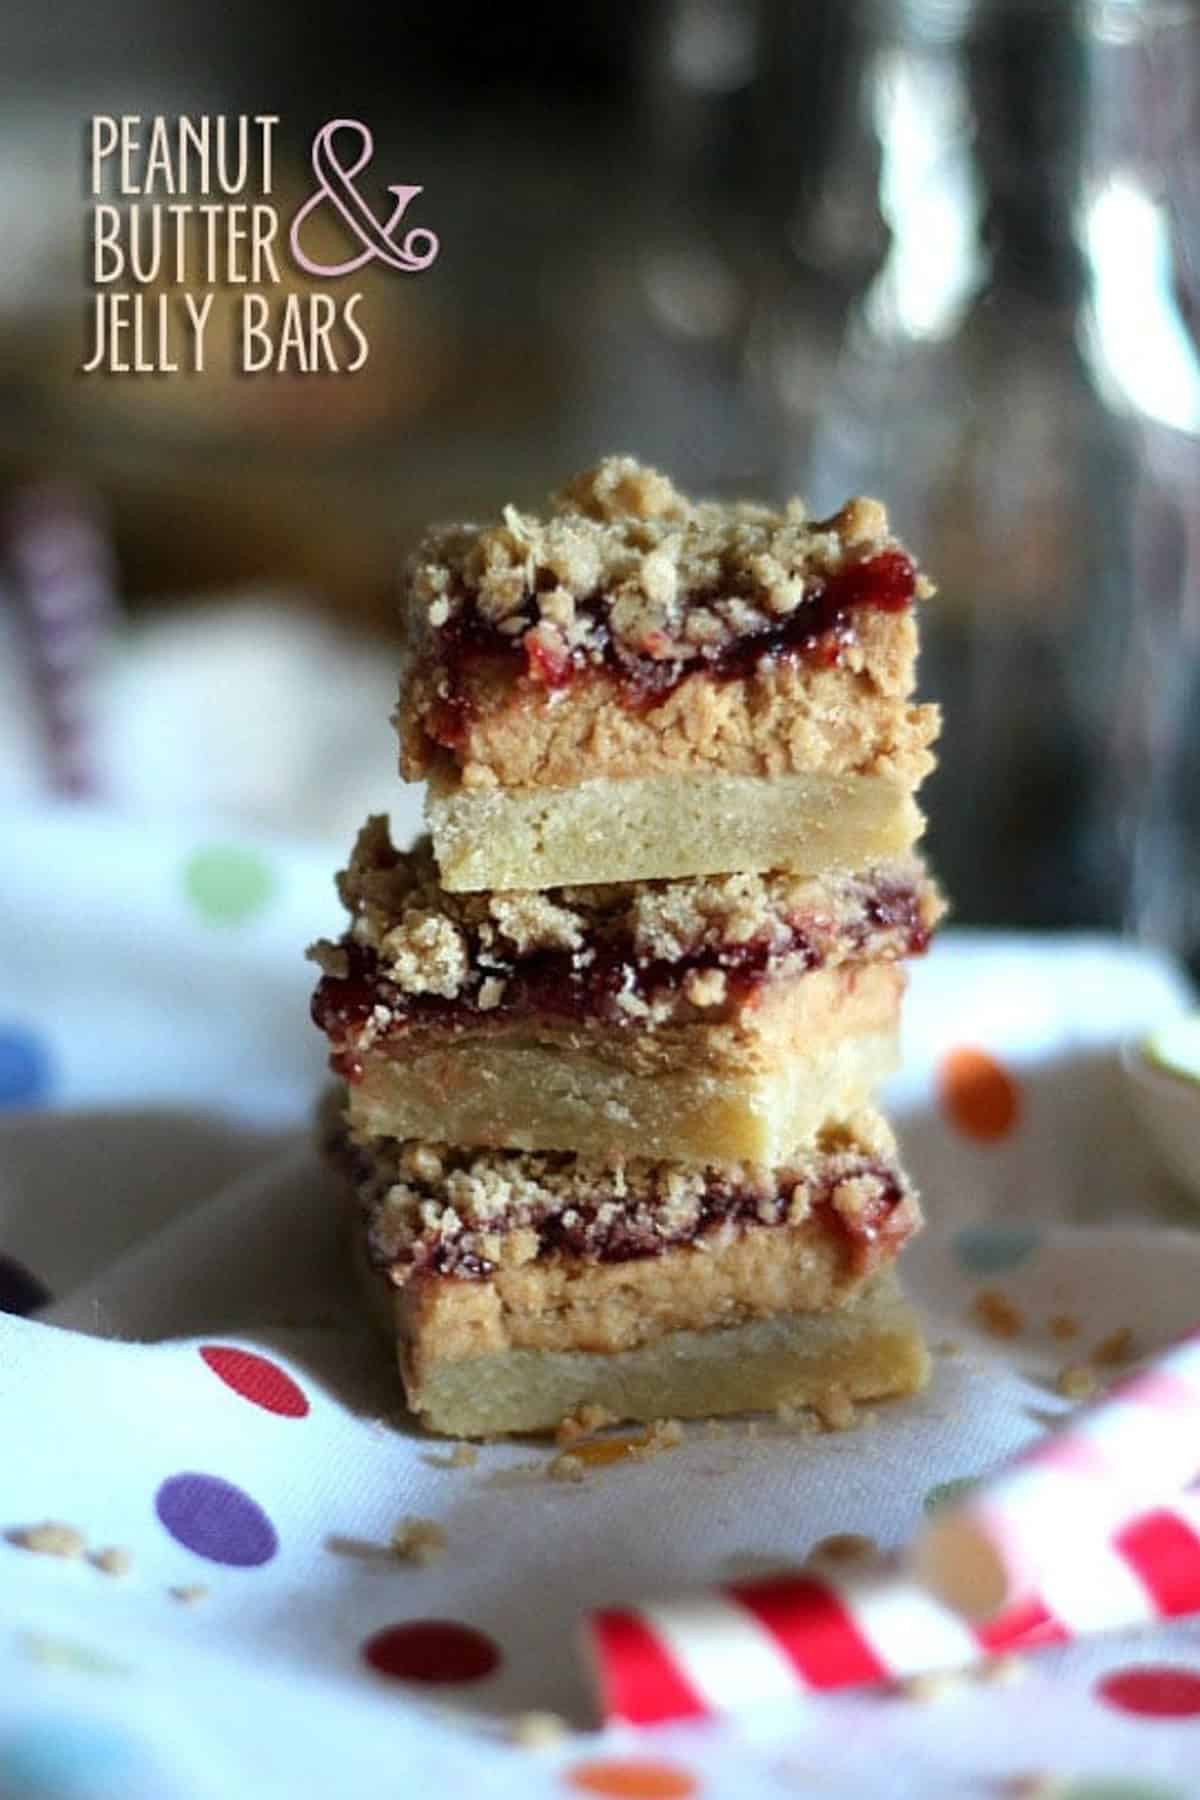 Three peanut butter jelly bars stacked on top of a polka dot table cloth.